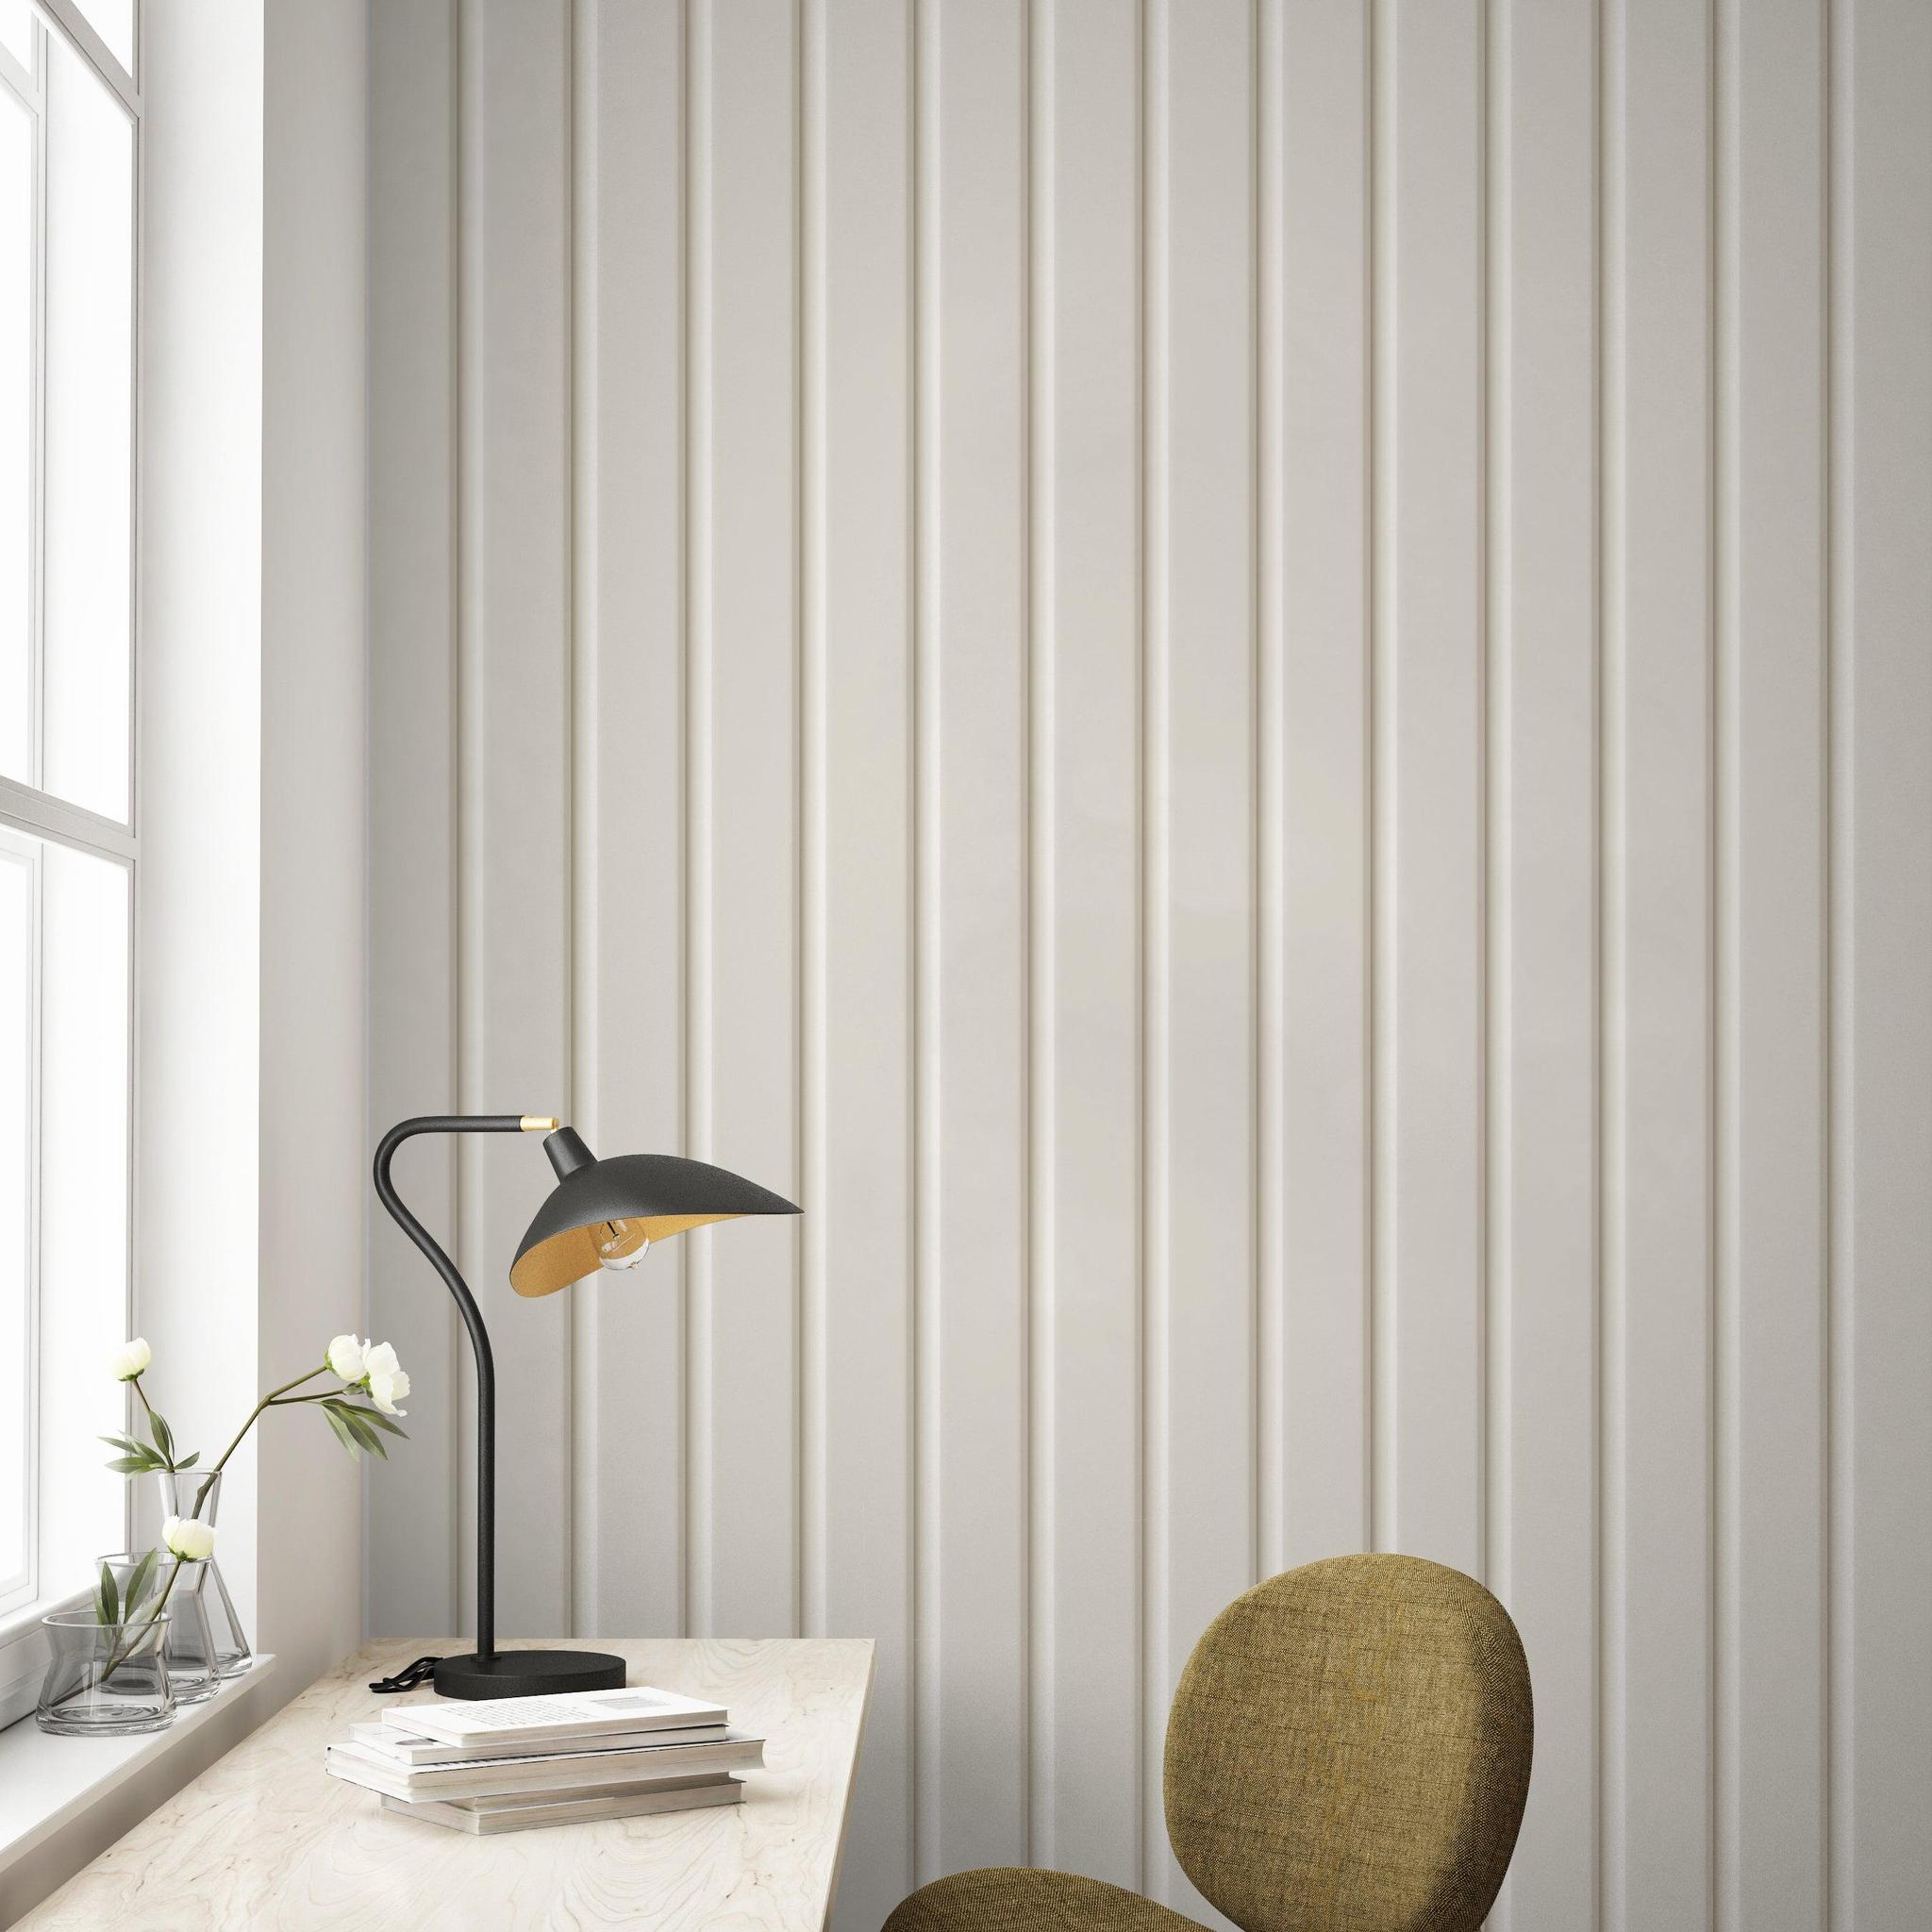 Minimalist study room featuring Allison Wallpaper by Wall Blush SG02, with a focus on the textured wall design.
